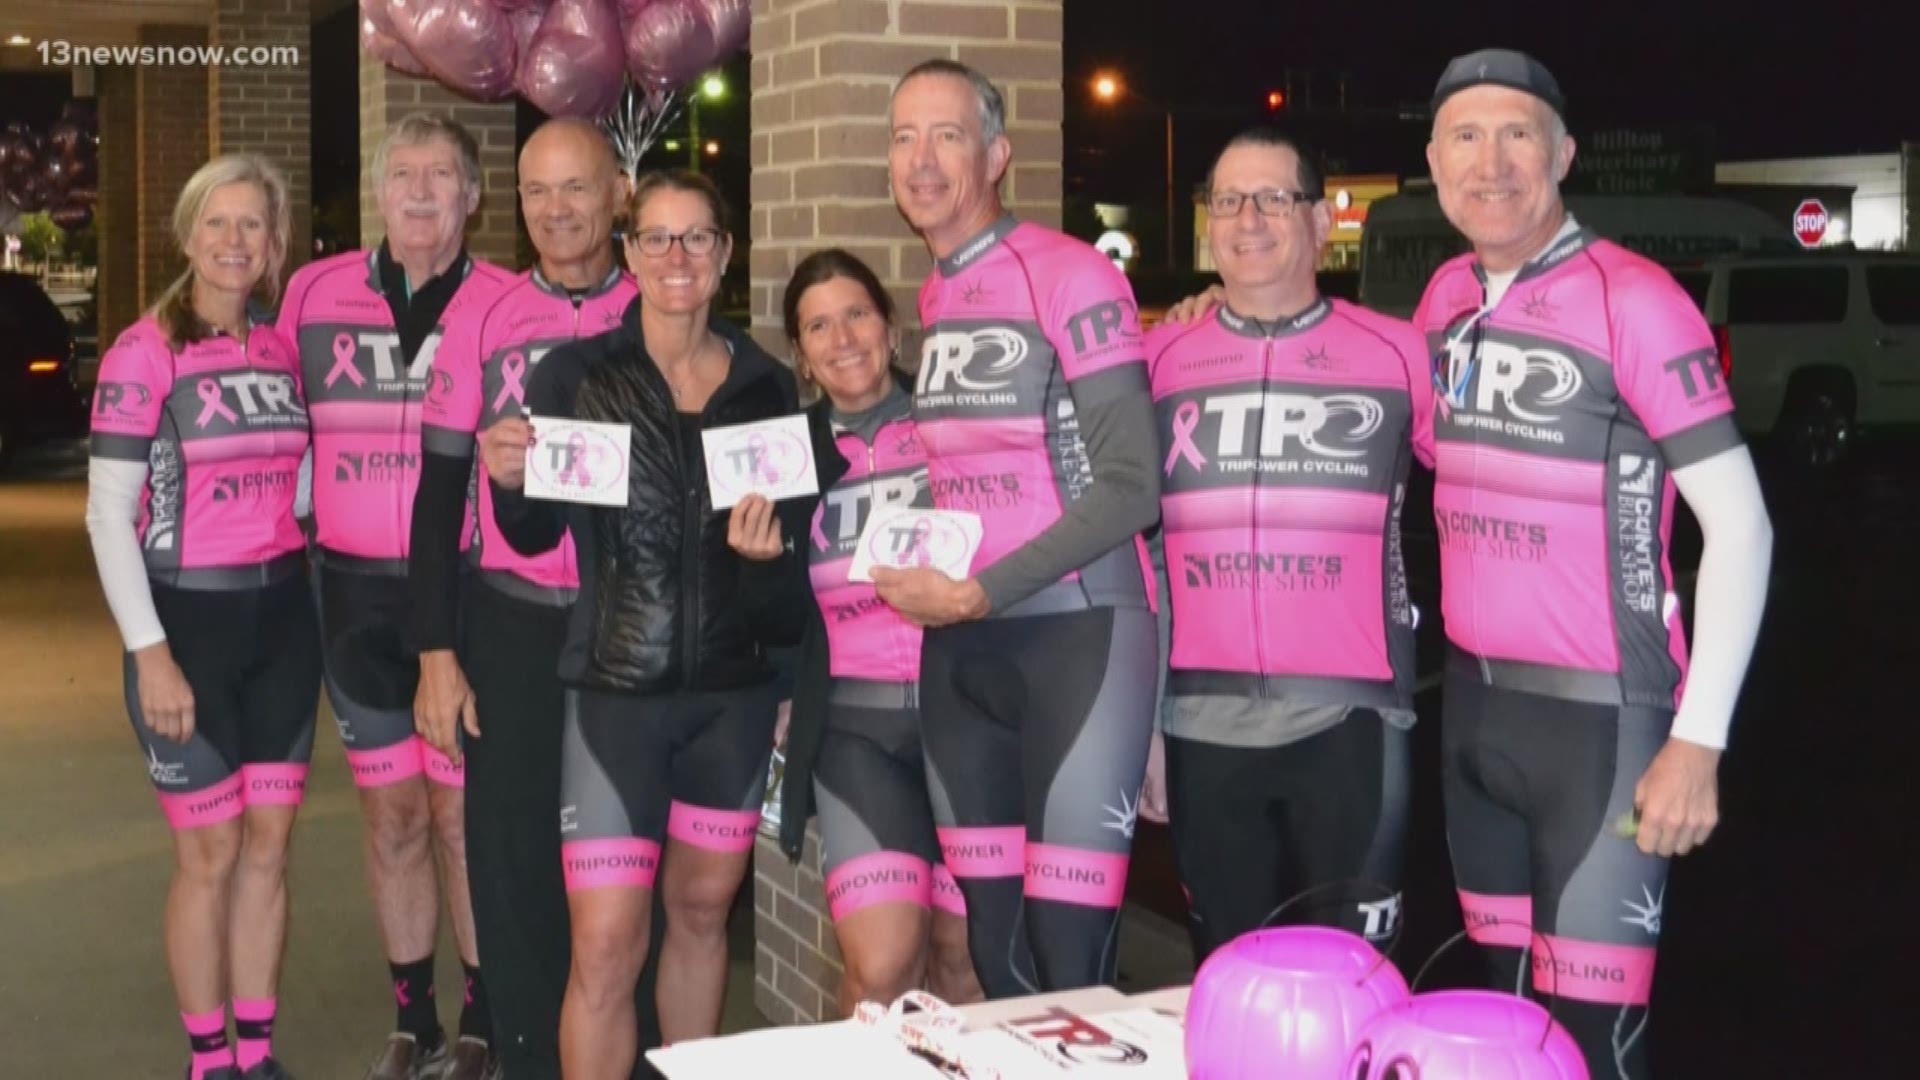 Tripower Cycling is riding for a cure and raising funds to support breast cancer research at Eastern Virginia Medical School. The goal is to raise $10,000!